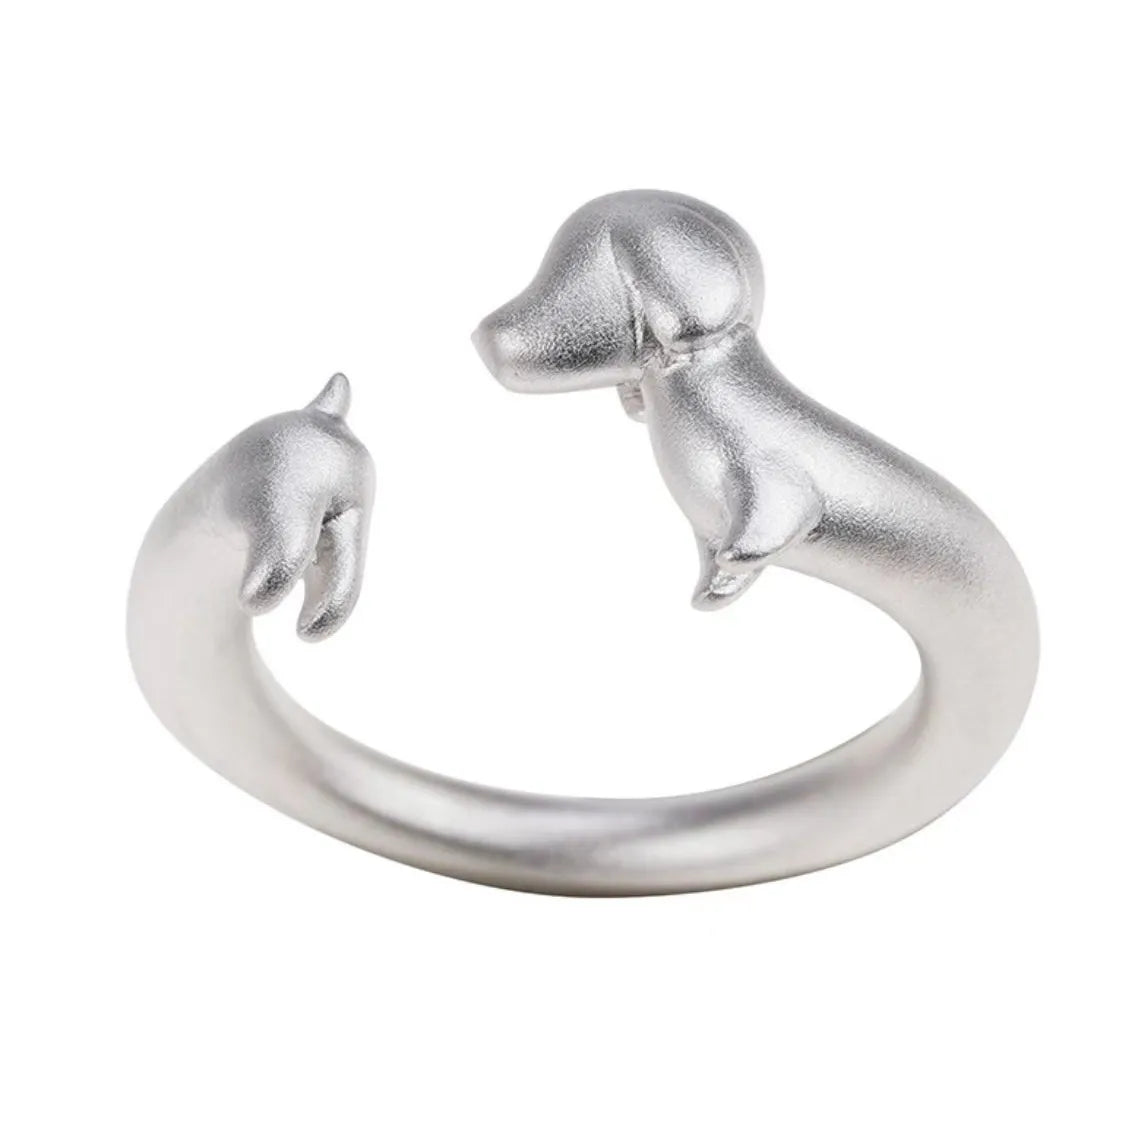 Adjustable Copper Dachshund Ring | The Best Dachshund Gifts